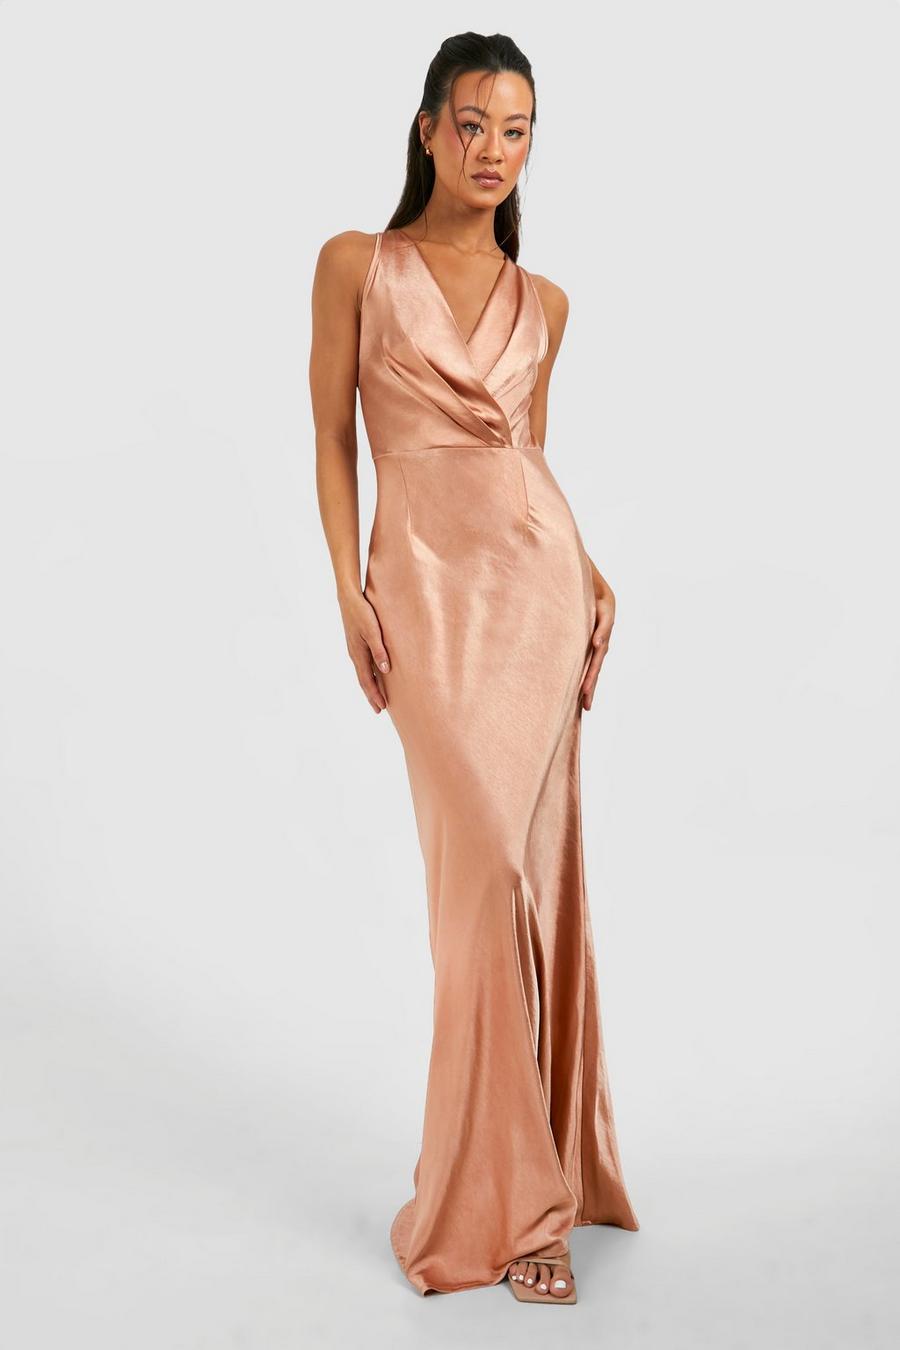 Bling Petite Rose Gold Sequin Wrap Front Mini With Blouson Sleeves